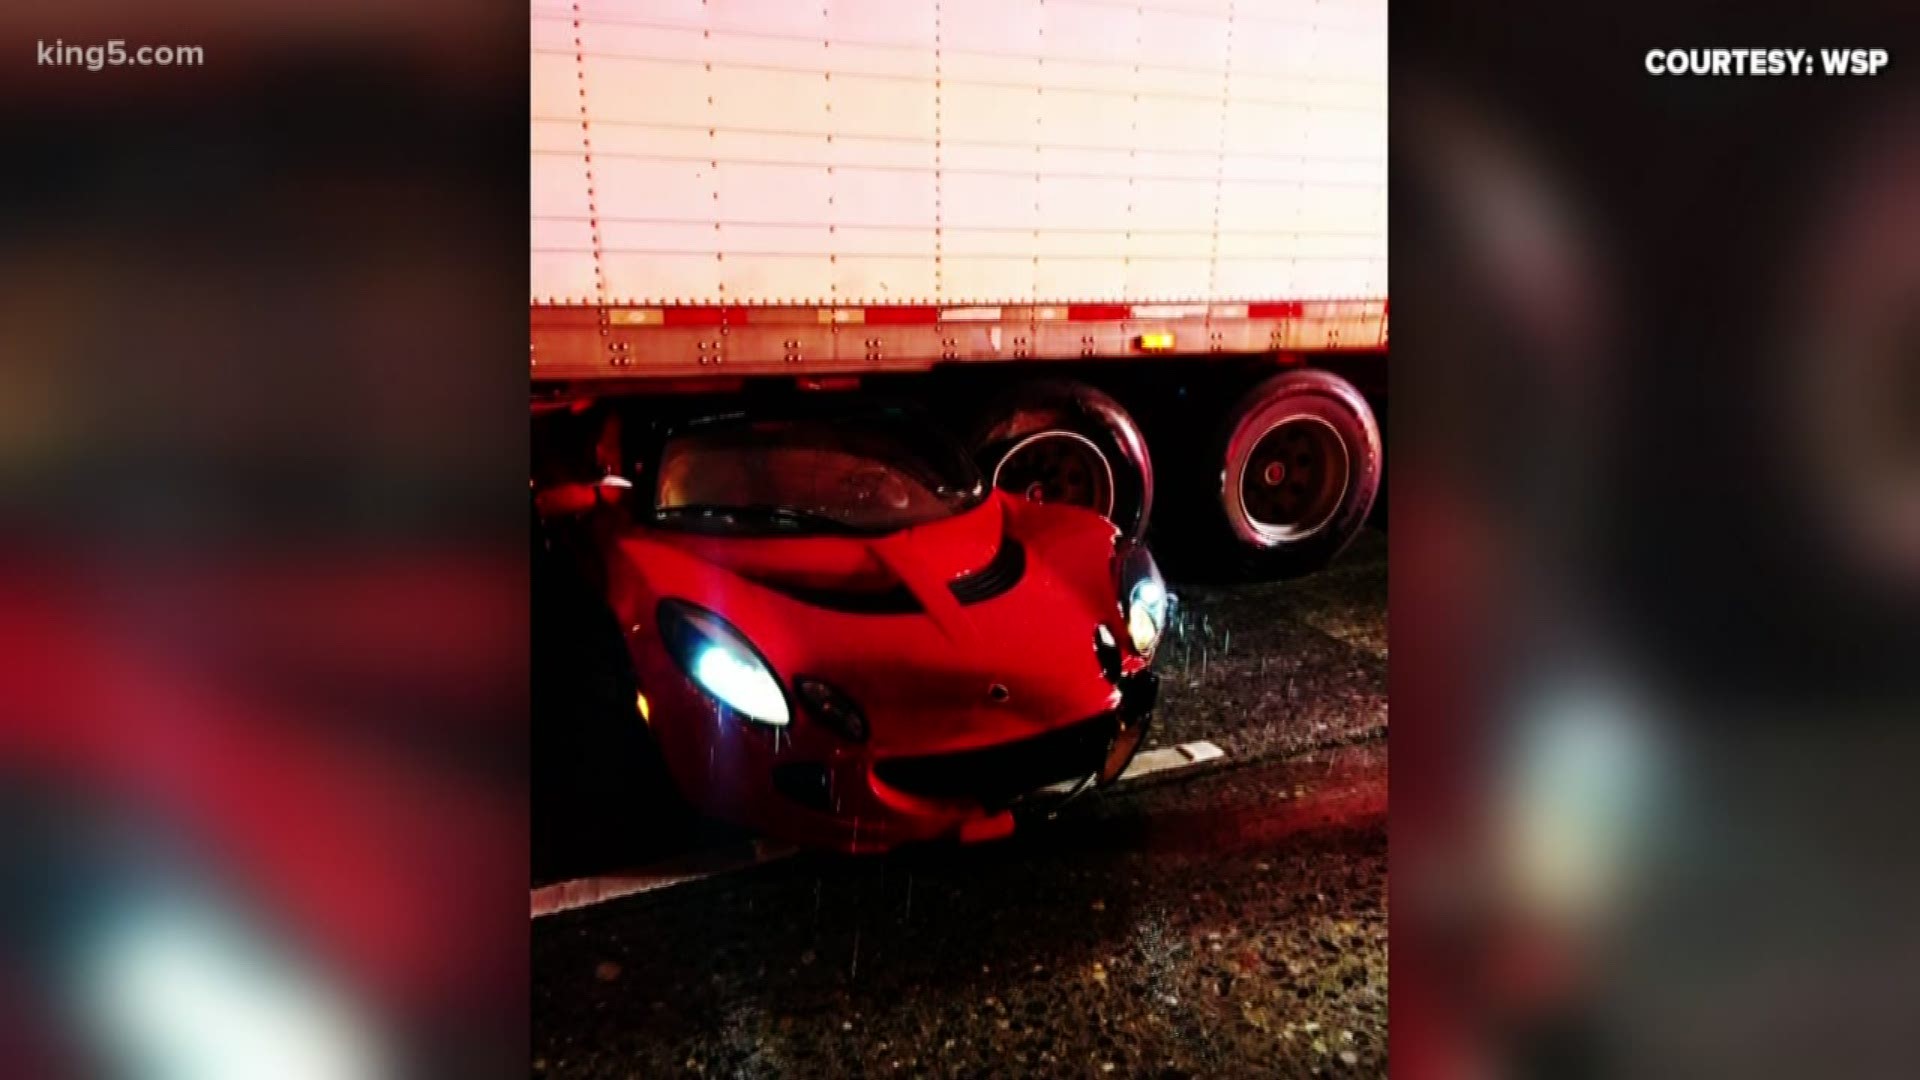 It was a very close call for the driver of a Lotus sports car when it hydroplaned under a semi-truck. Luckily, no one was hurt.